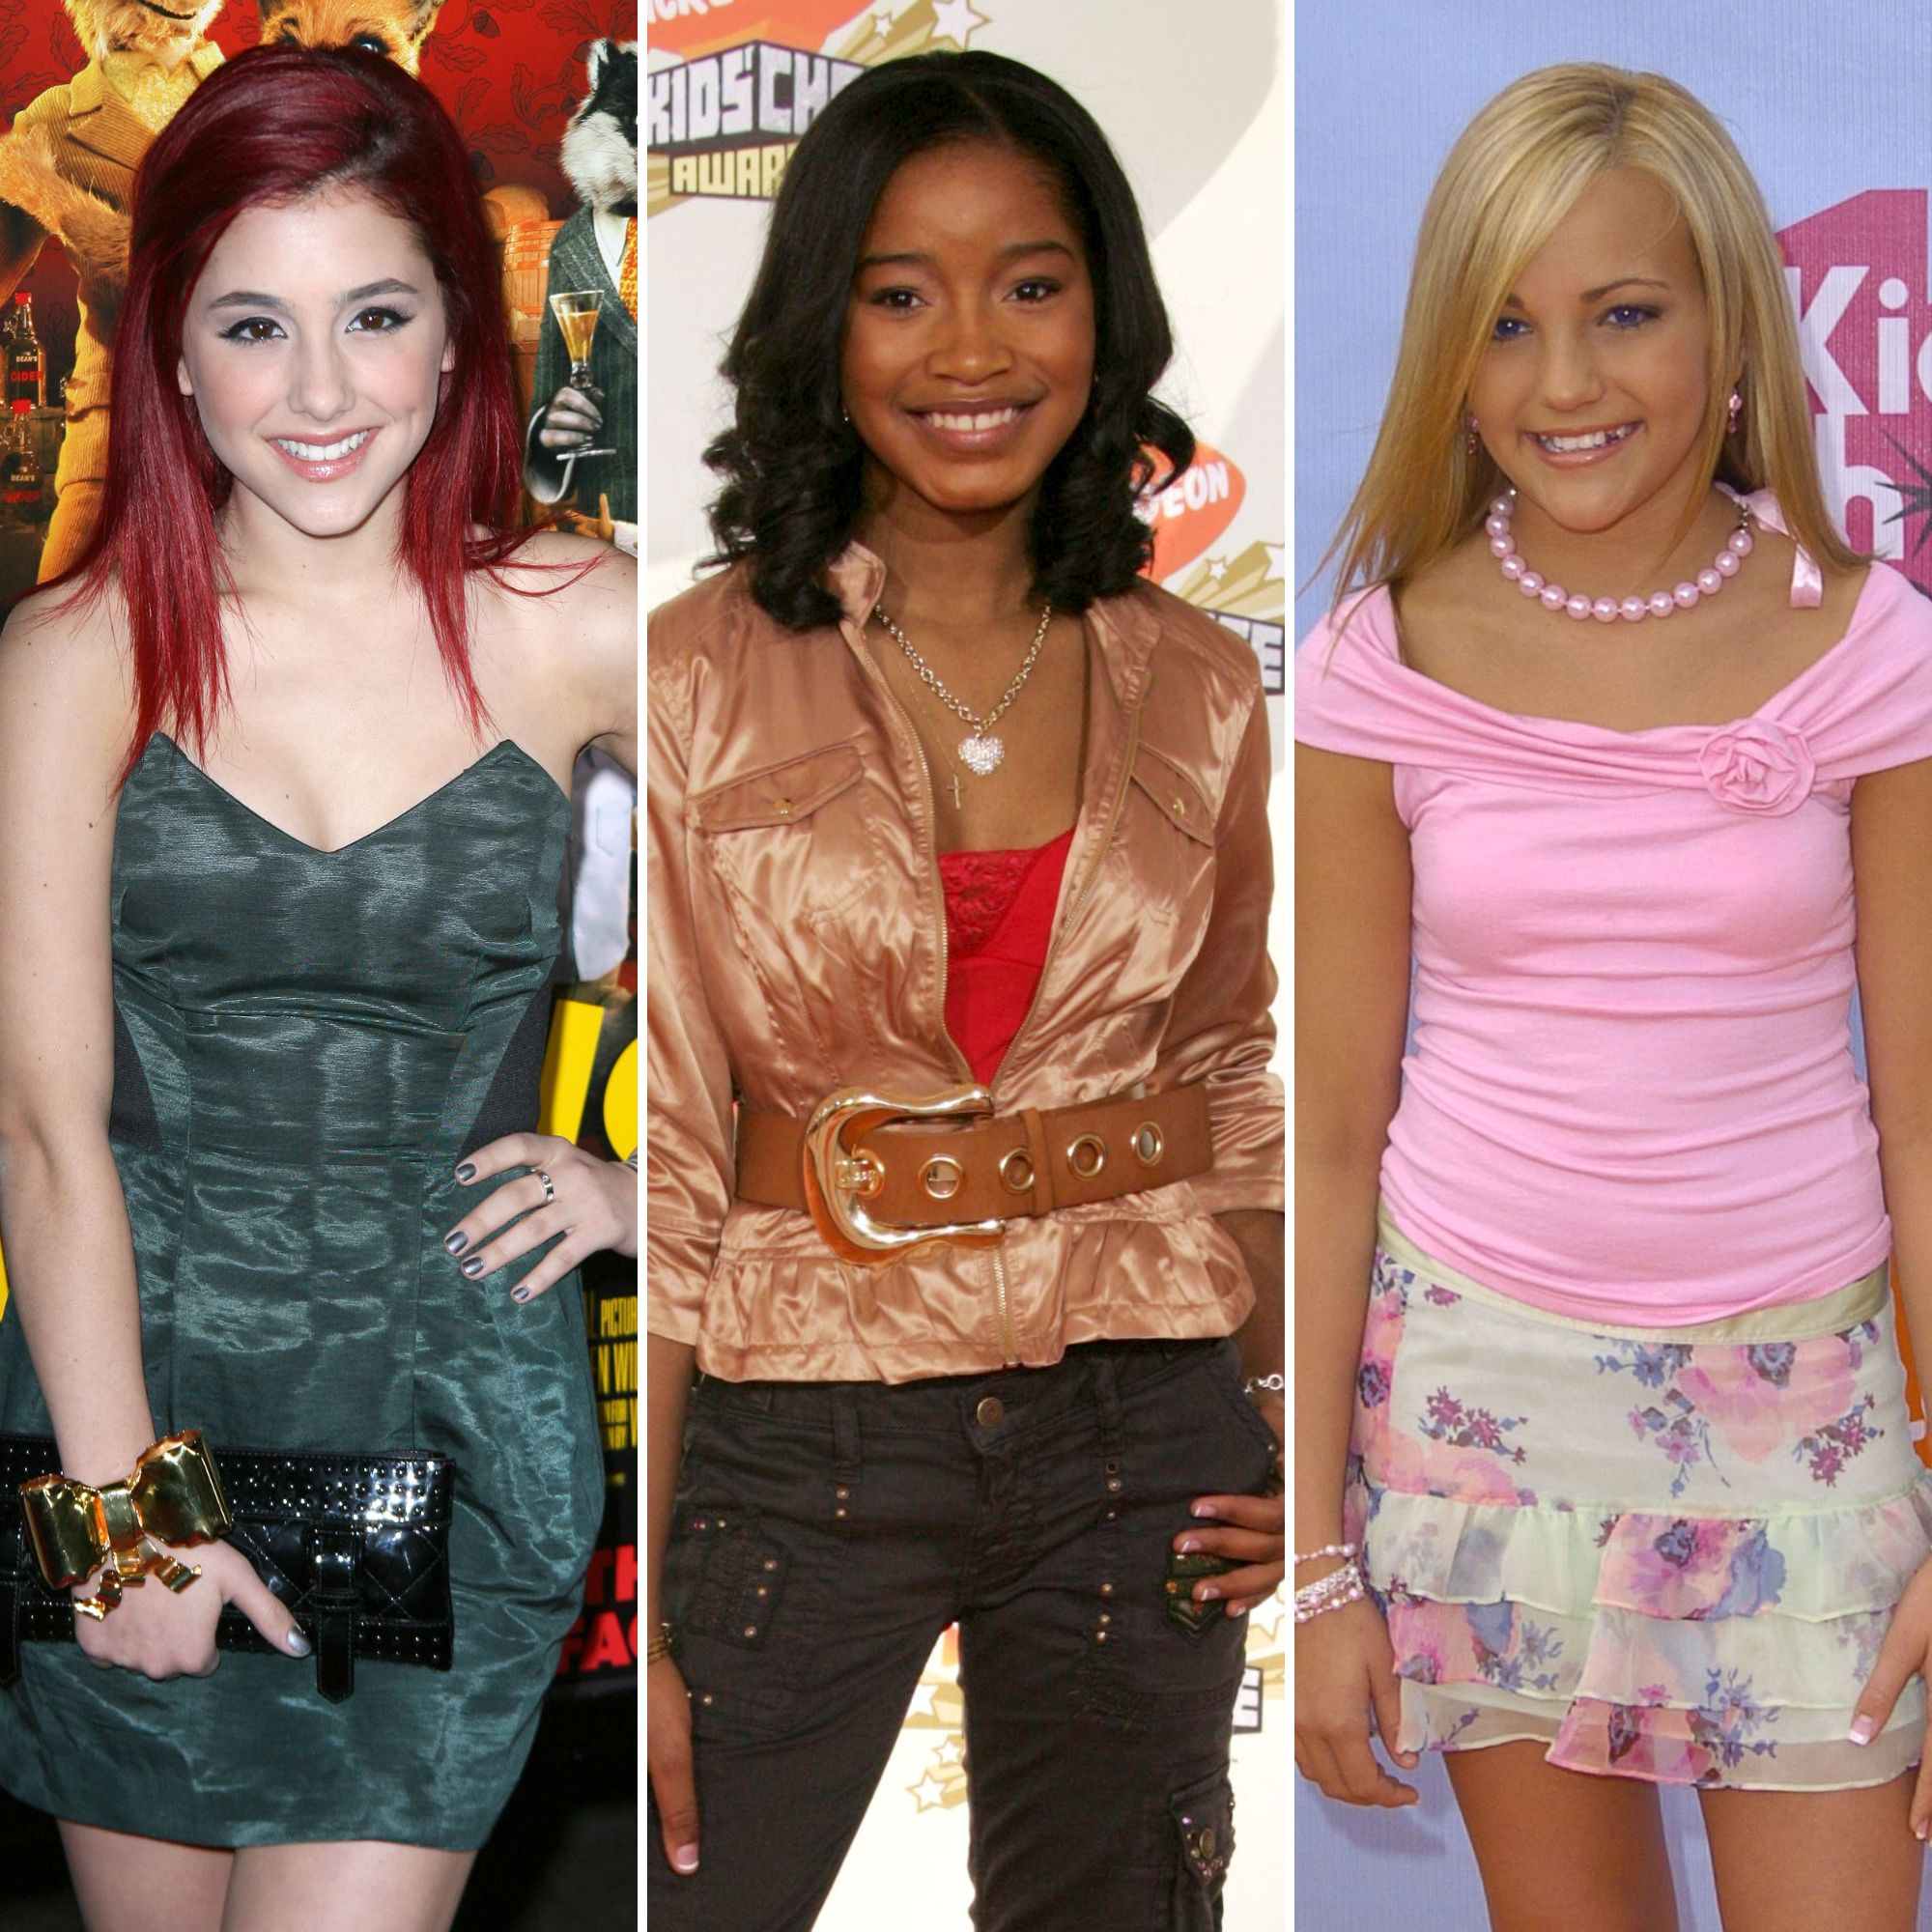 Vp Xxx 15 - Nickelodeon Girls Who Look Different: Then-And-Now Pics